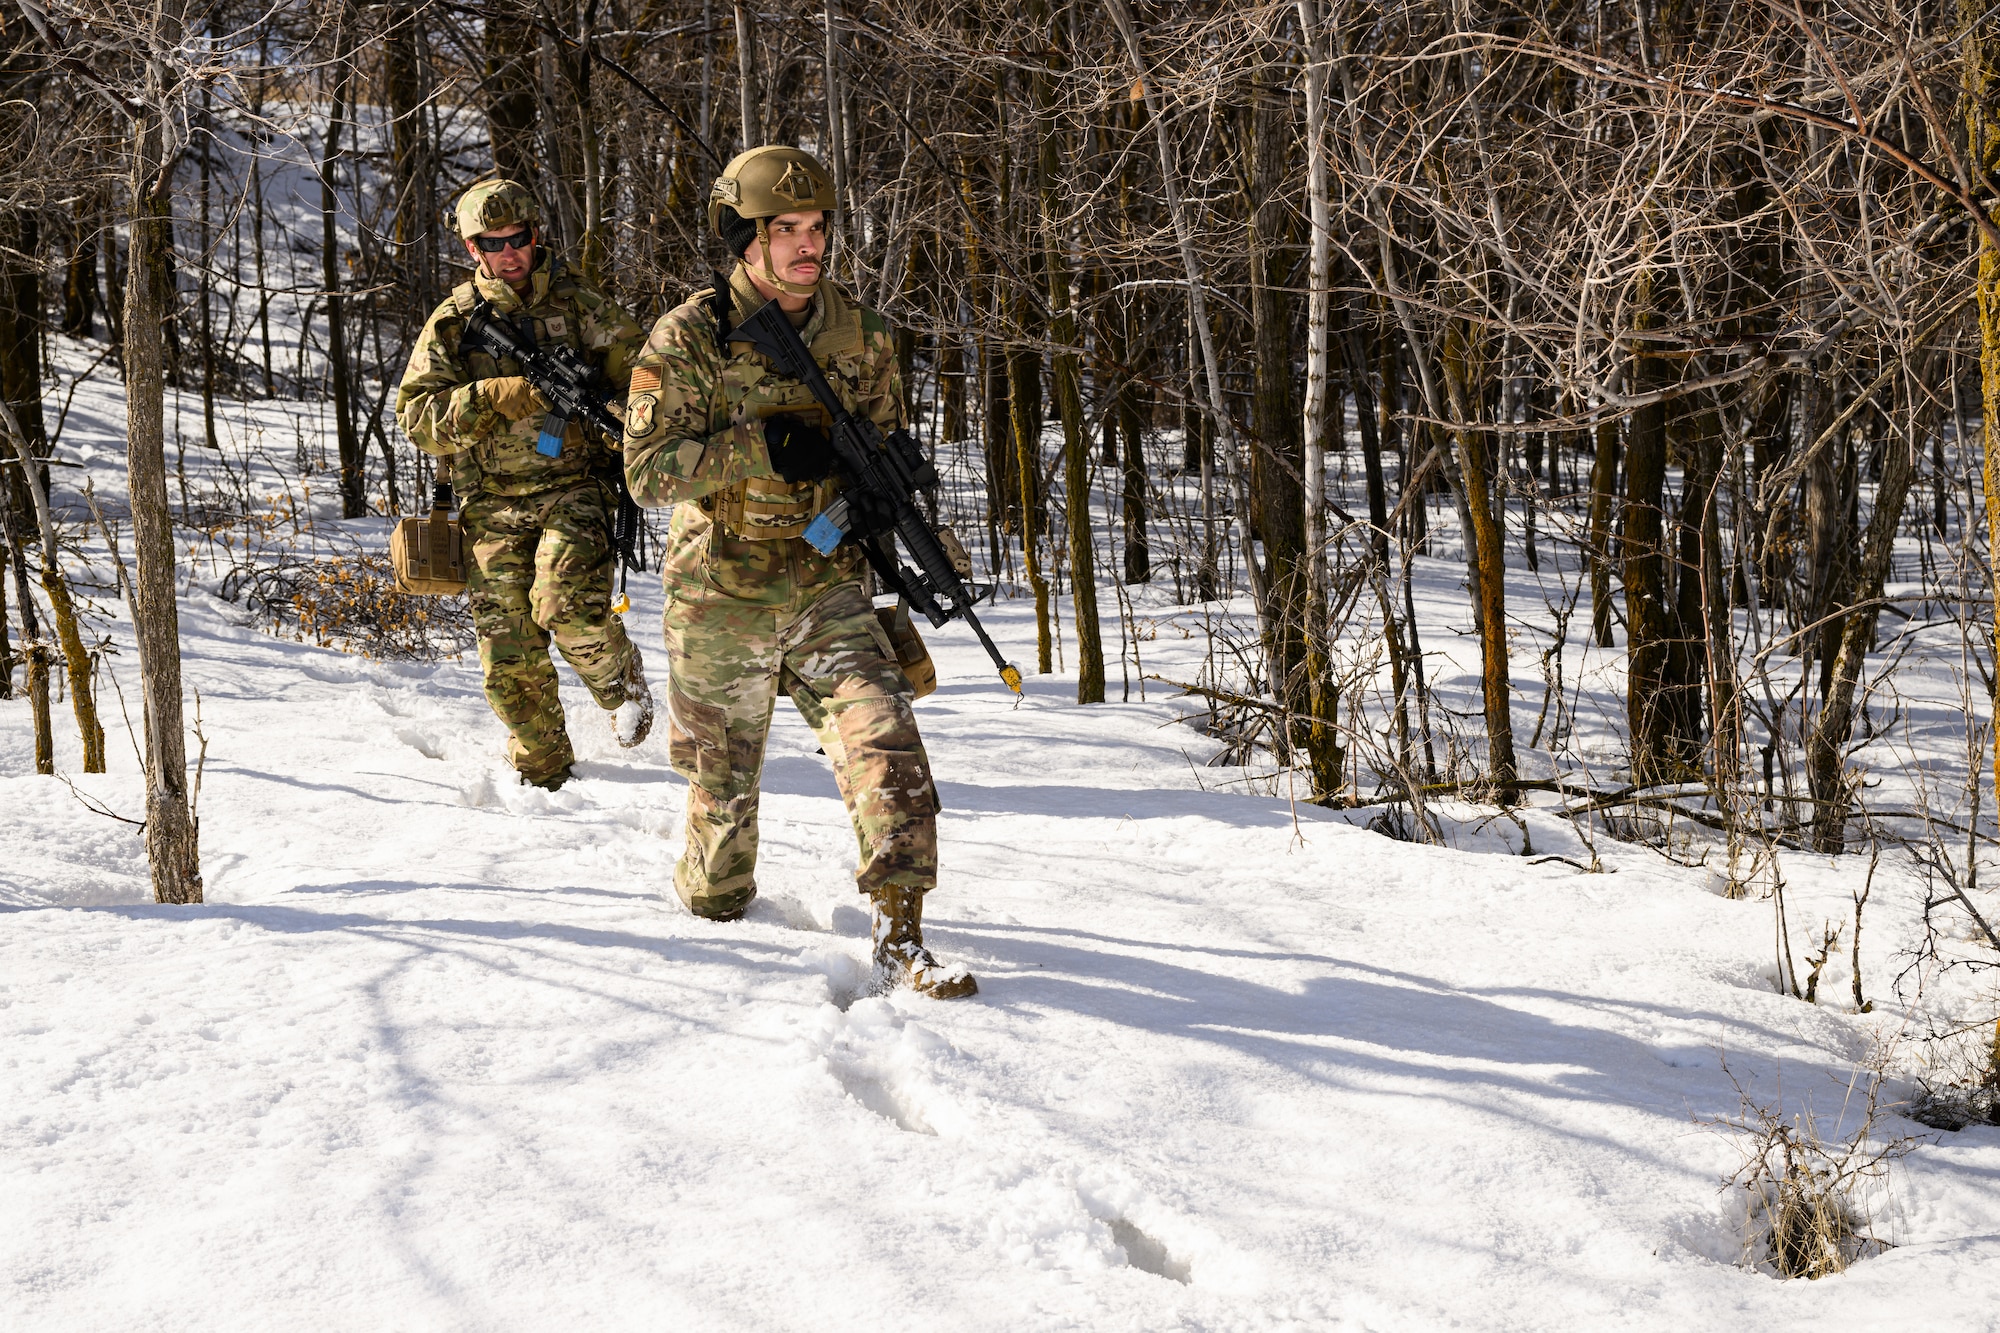 Right, Staff Sgt. Brandon Stoker and Tech. Sgt. Andrew Lintelman, 75th Security Forces Squadron, search for opposing forces during a training exercise at Hill Air Force Base, Utah, March 21, 2023. The squadron conducted a series of near-peer adversary field training exercises in the Base Operations Readiness Area from March 18-28. (U.S. Air Force photo by R. Nial Bradshaw)